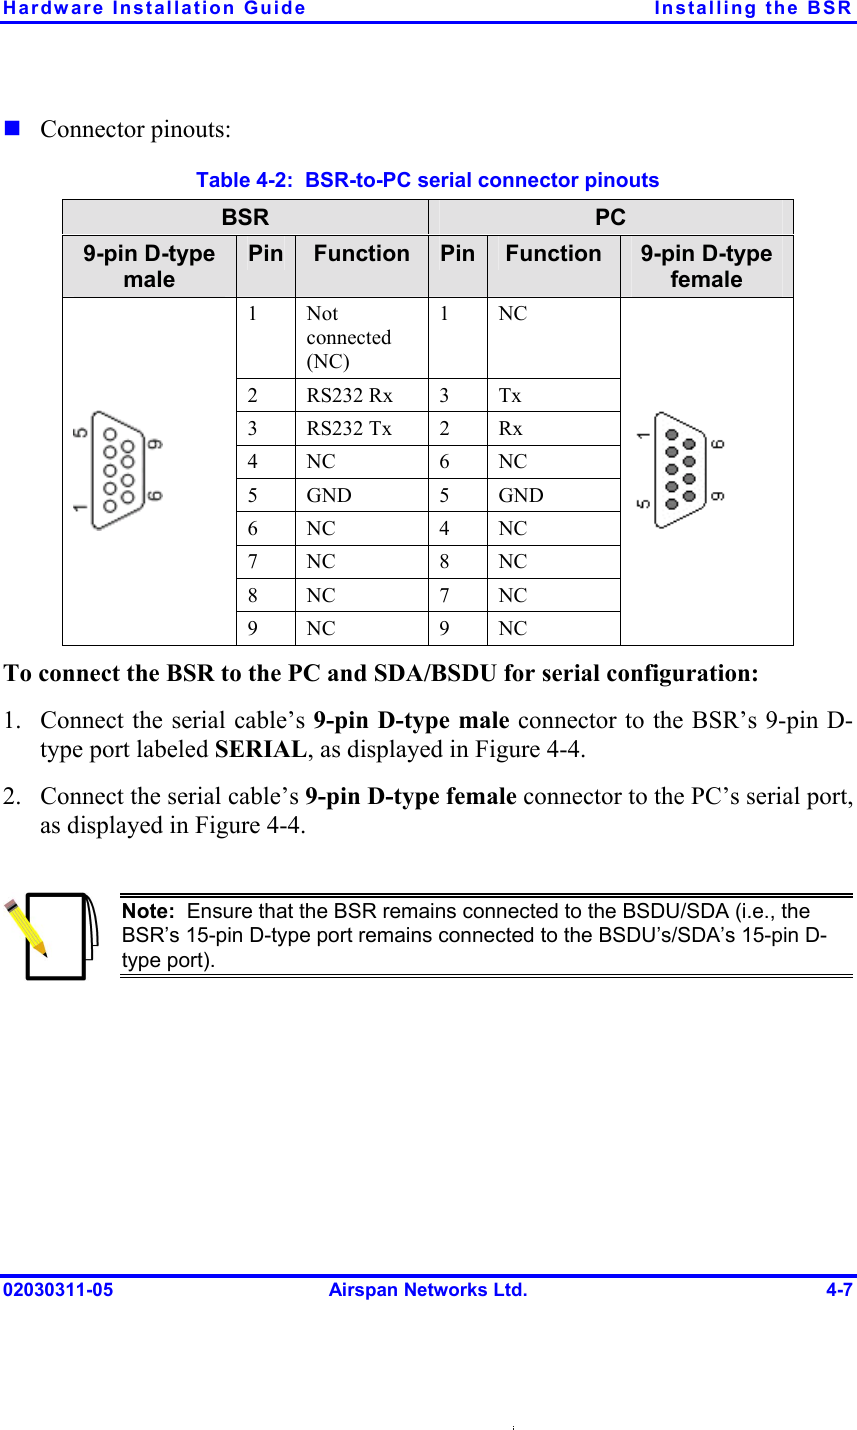 Hardware Installation Guide  Installing the BSR 02030311-05  Airspan Networks Ltd.  4-7 ! Connector pinouts:  Table  4-2:  BSR-to-PC serial connector pinouts BSR  PC 9-pin D-type male Pin  Function  Pin Function  9-pin D-type female 1  Not connected (NC) 1 NC 2 RS232 Rx 3 Tx 3 RS232 Tx 2 Rx 4 NC  6 NC 5 GND  5 GND 6 NC  4 NC 7 NC  8 NC 8 NC  7 NC  9 NC  9 NC  To connect the BSR to the PC and SDA/BSDU for serial configuration: 1.  Connect the serial cable’s 9-pin D-type male connector to the BSR’s 9-pin D-type port labeled SERIAL, as displayed in Figure  4-4. 2.  Connect the serial cable’s 9-pin D-type female connector to the PC’s serial port, as displayed in Figure  4-4.   Note:  Ensure that the BSR remains connected to the BSDU/SDA (i.e., the BSR’s 15-pin D-type port remains connected to the BSDU’s/SDA’s 15-pin D-type port).  